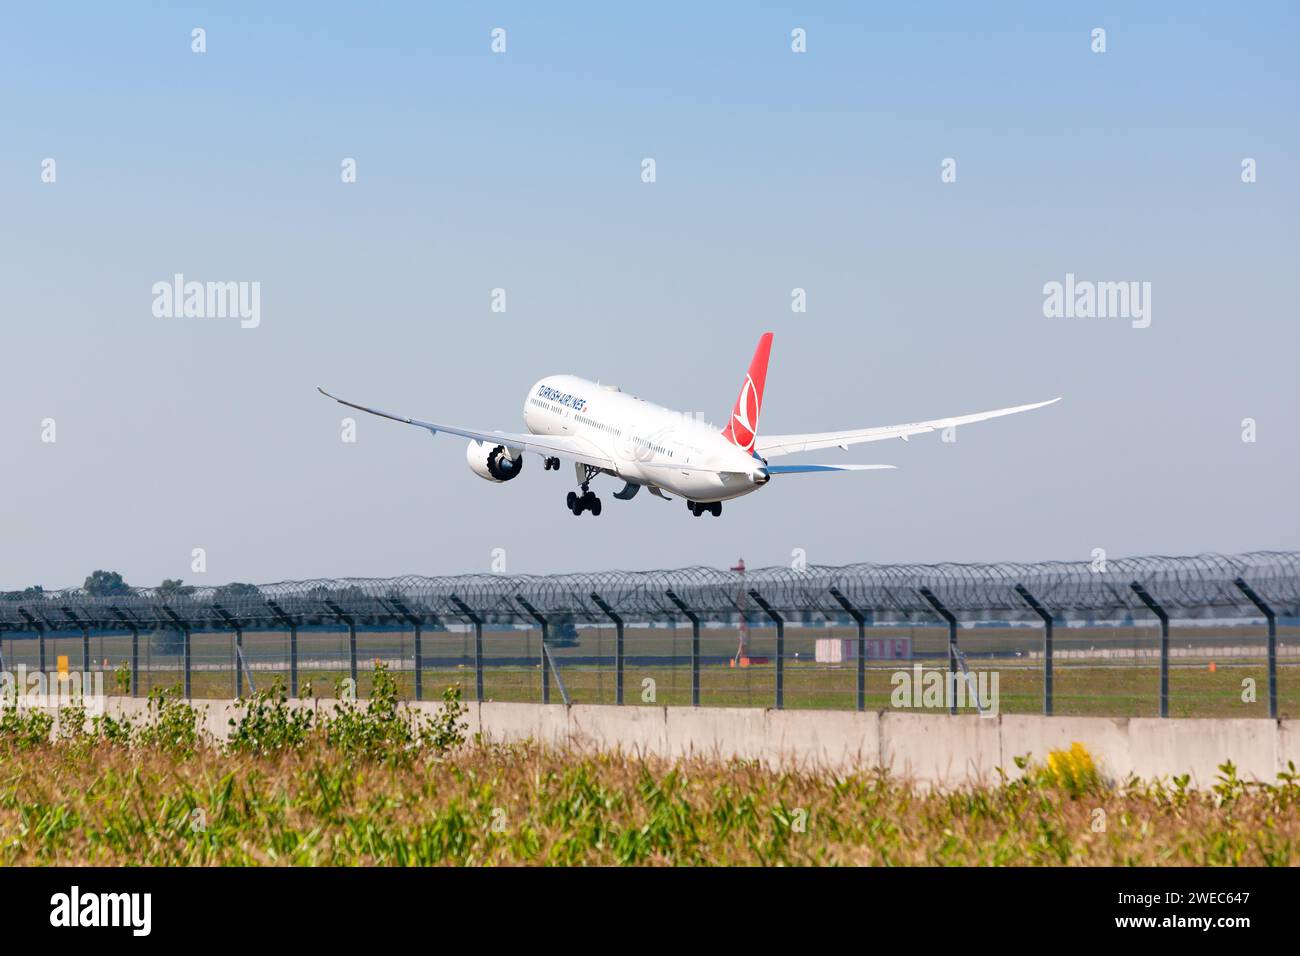 Boryspil, Ukraine - August 5, 2020: Airplane Boeing 787 Dreamliner of Turkish Airlines is taking-off from Boryspil International Airport Stock Photo